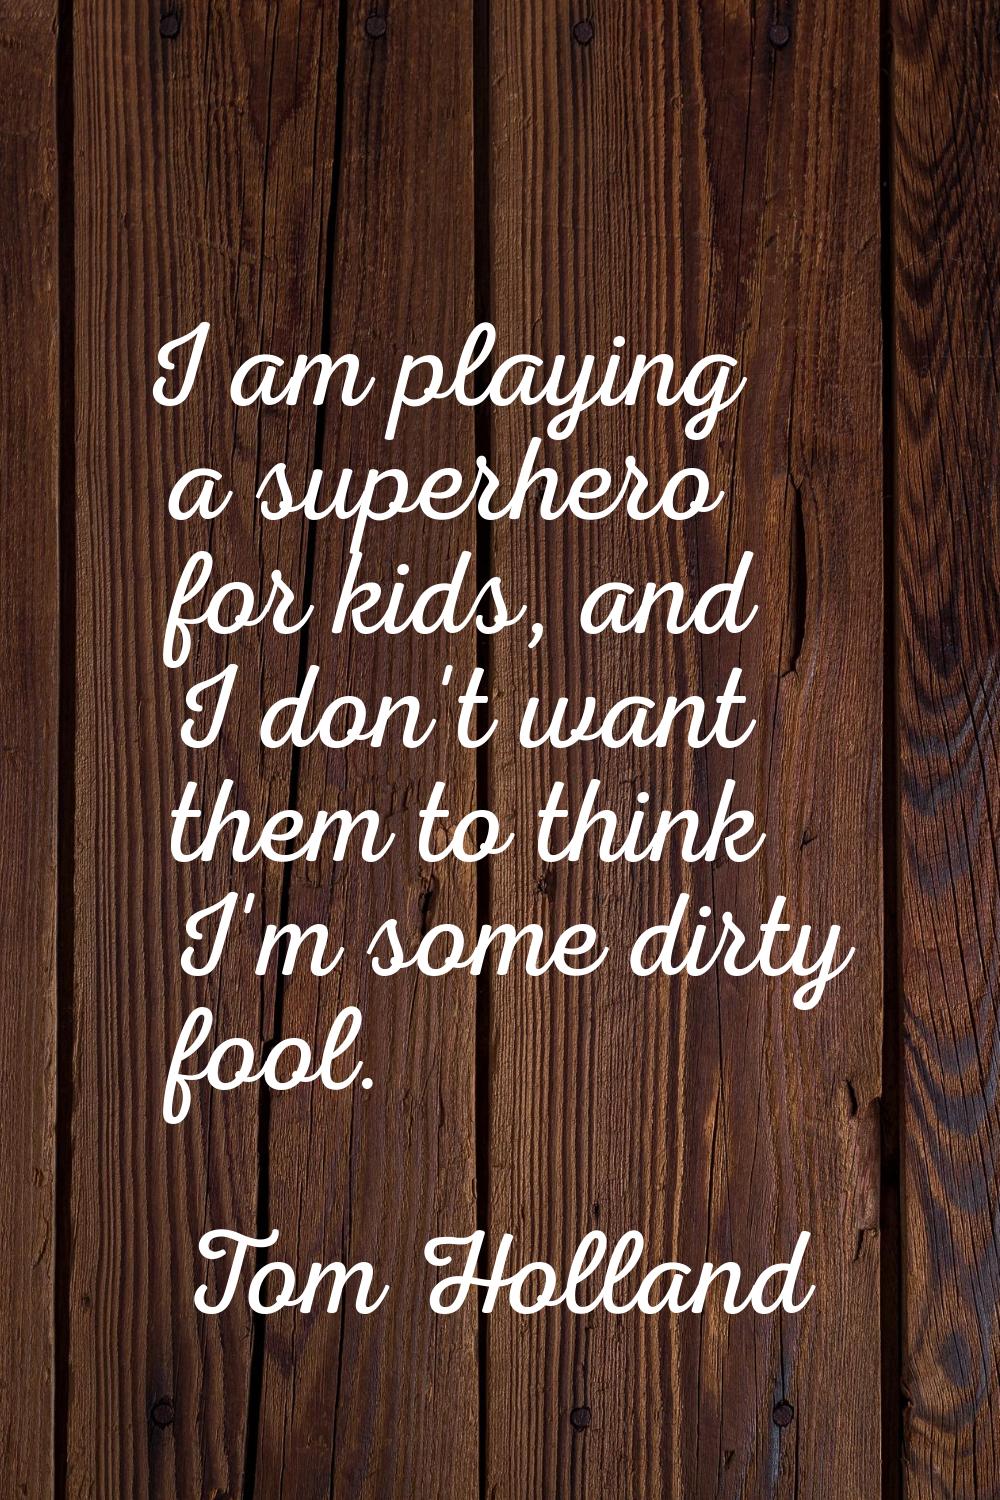 I am playing a superhero for kids, and I don't want them to think I'm some dirty fool.